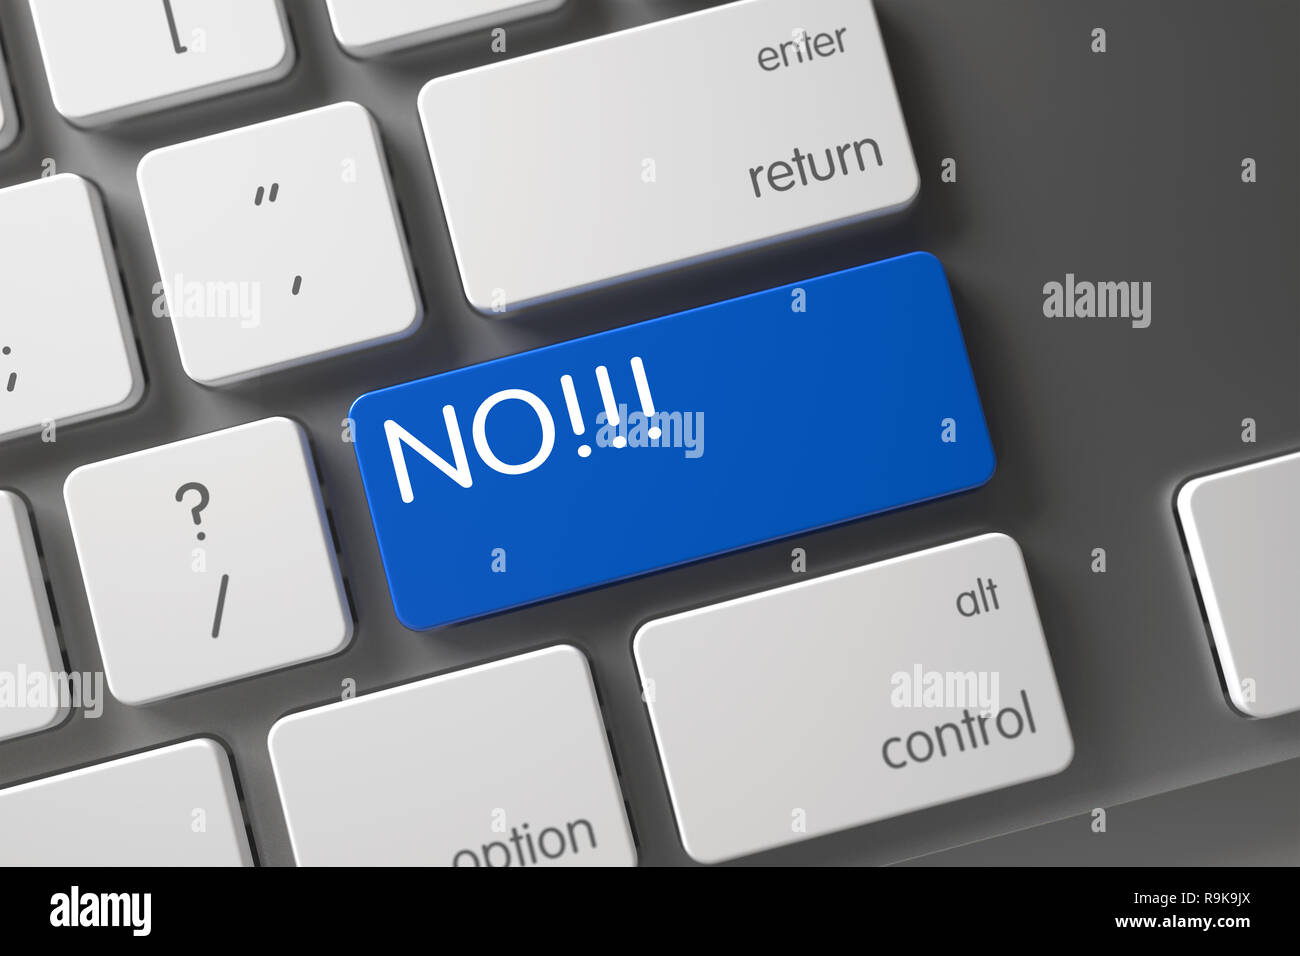 No - Denial Concept. Modernized Keyboard with No on Blue Enter Key Background, Selected Focus. 3D Render. Stock Photo